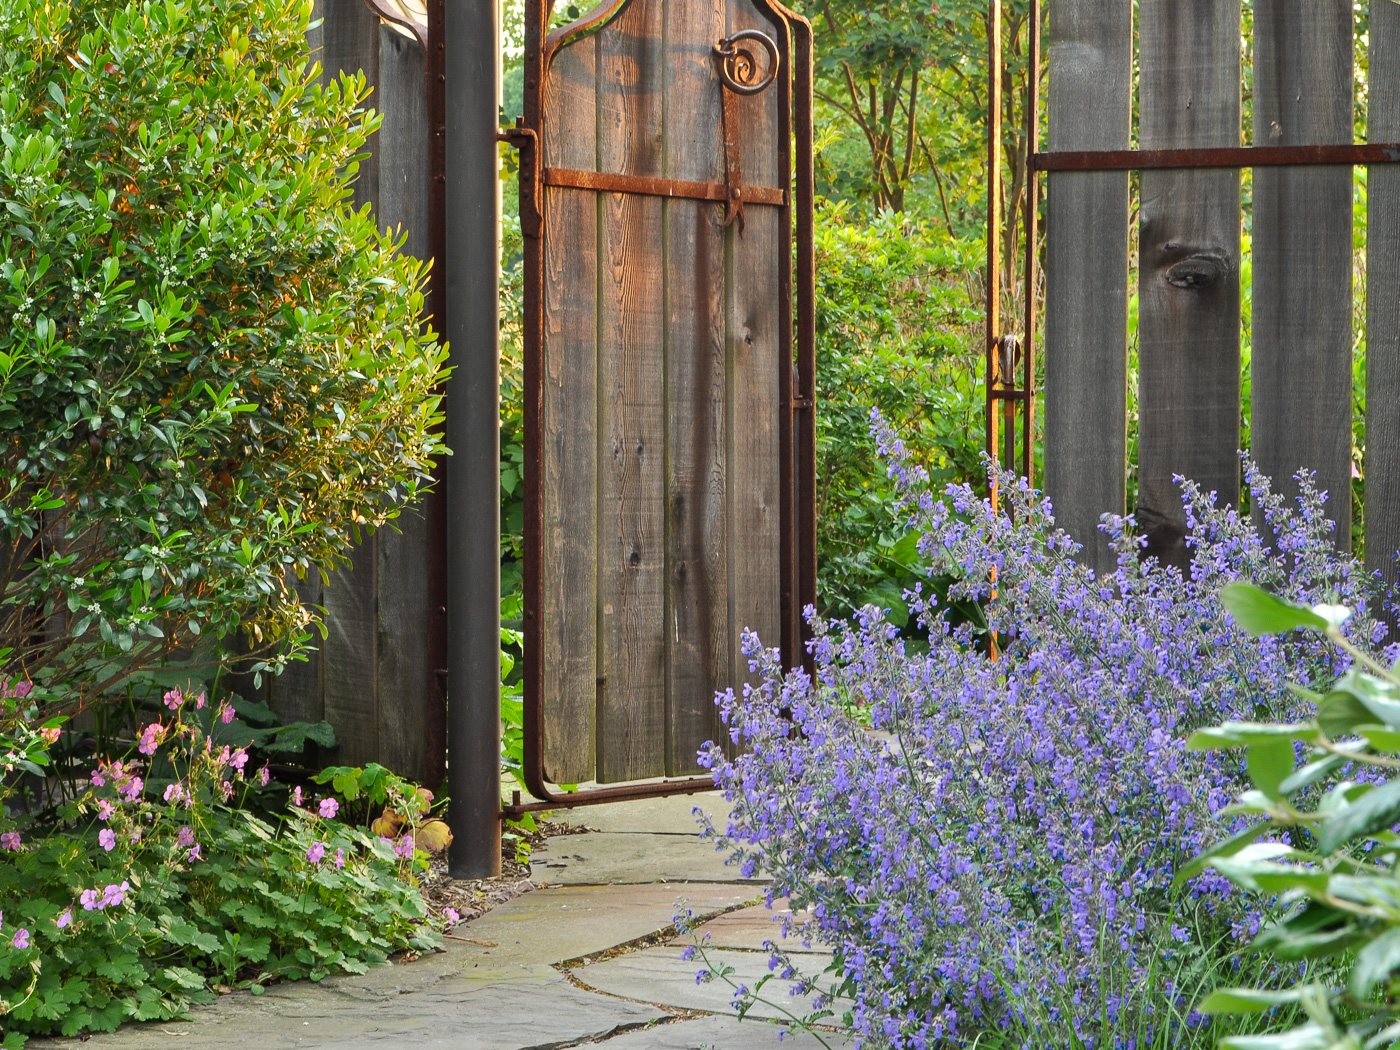 Low perspective view of open rustic garden gate flanked by garden beds